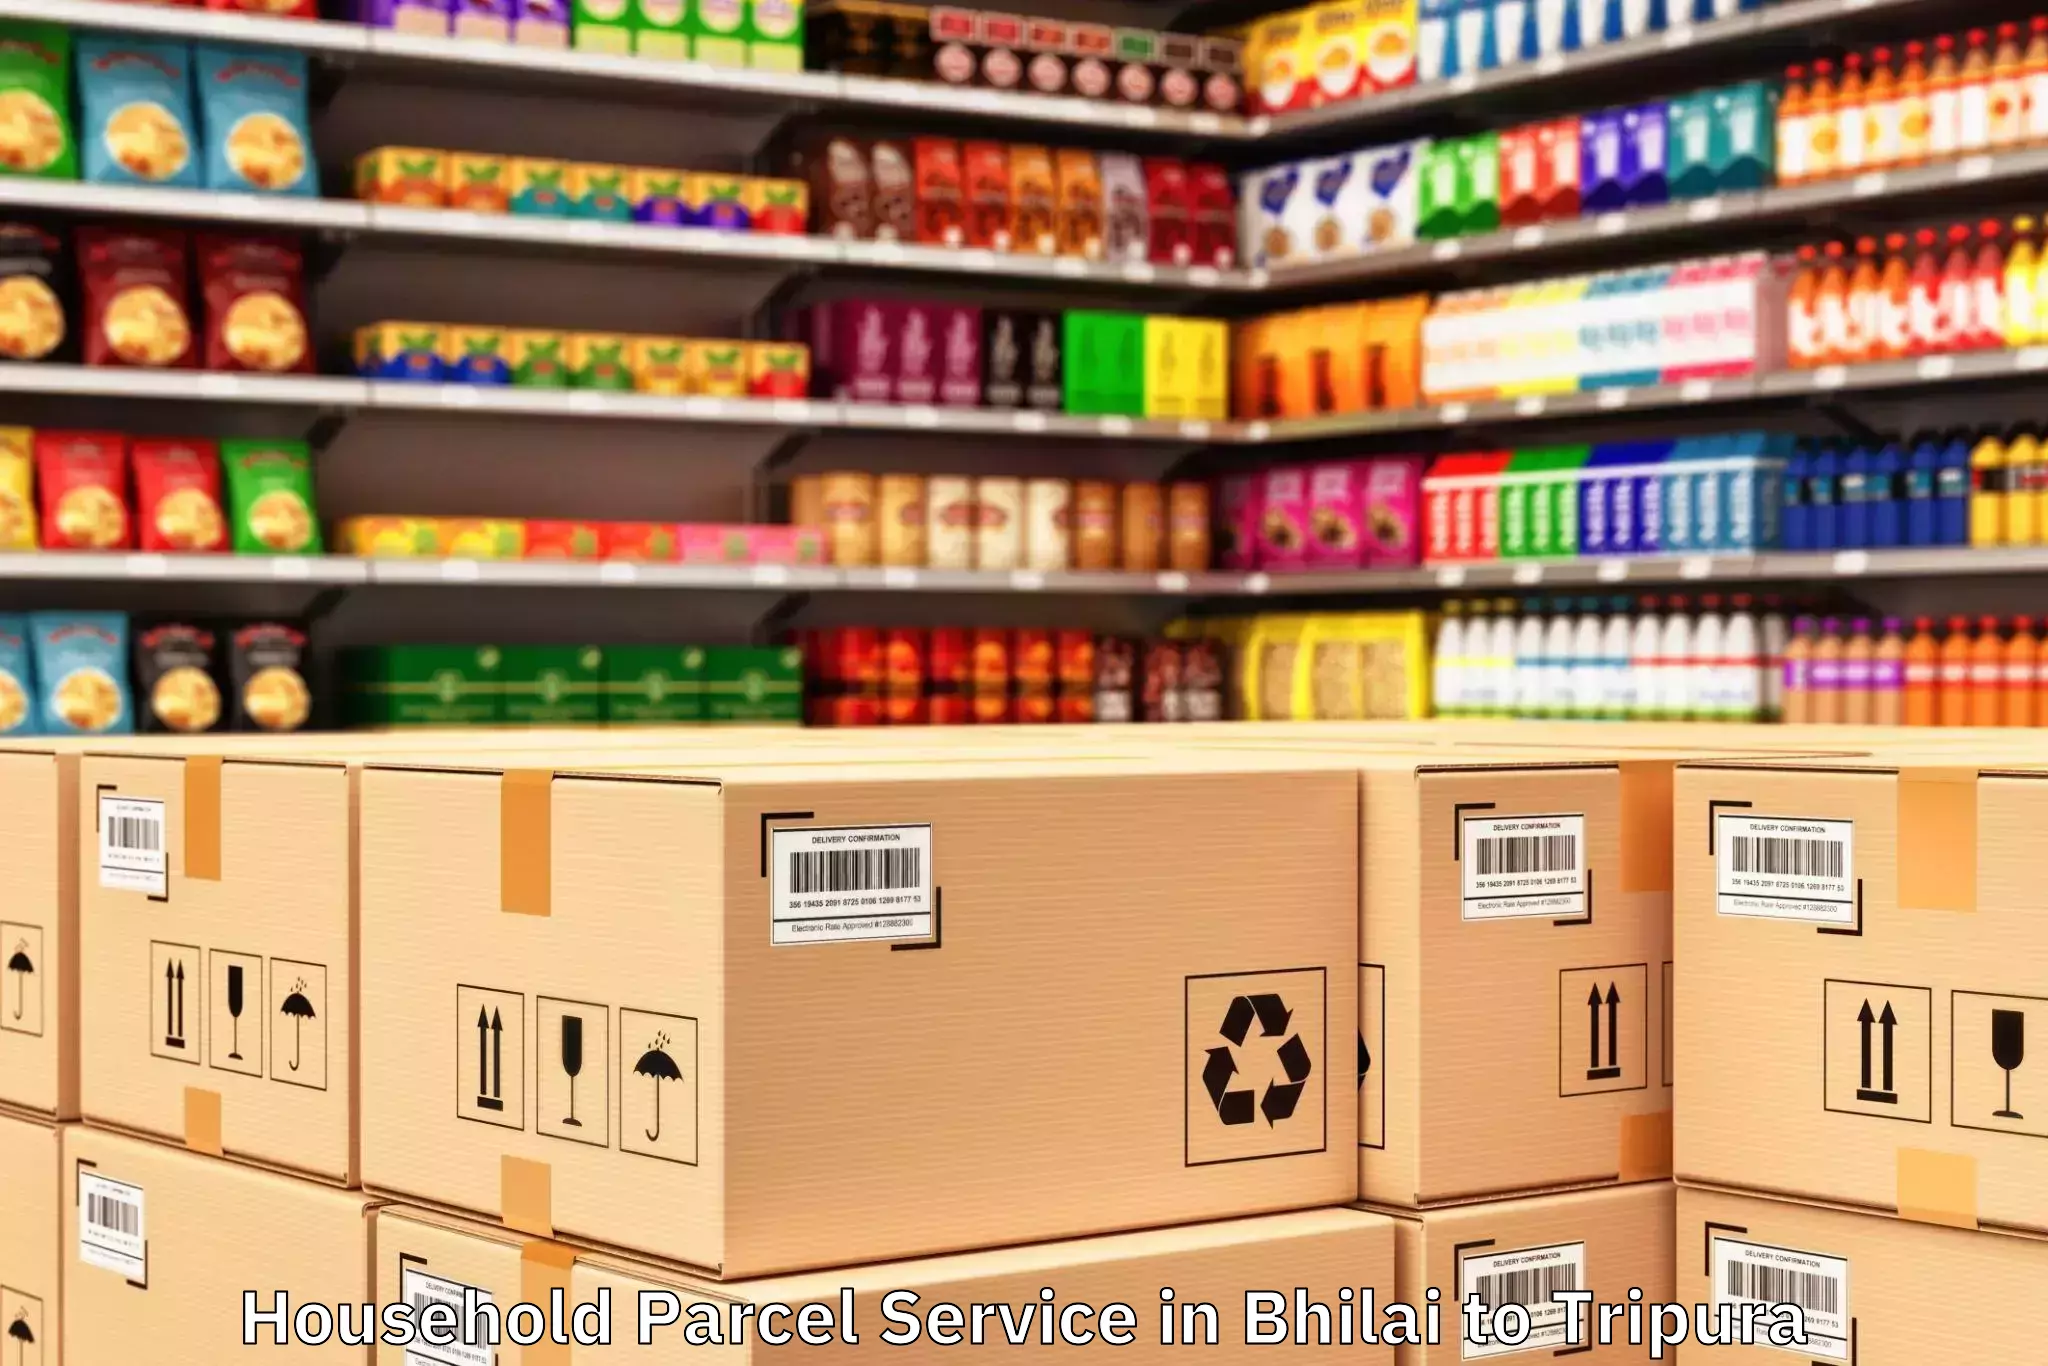 Top Bhilai to Udaipur Tripura Household Parcel Service Available